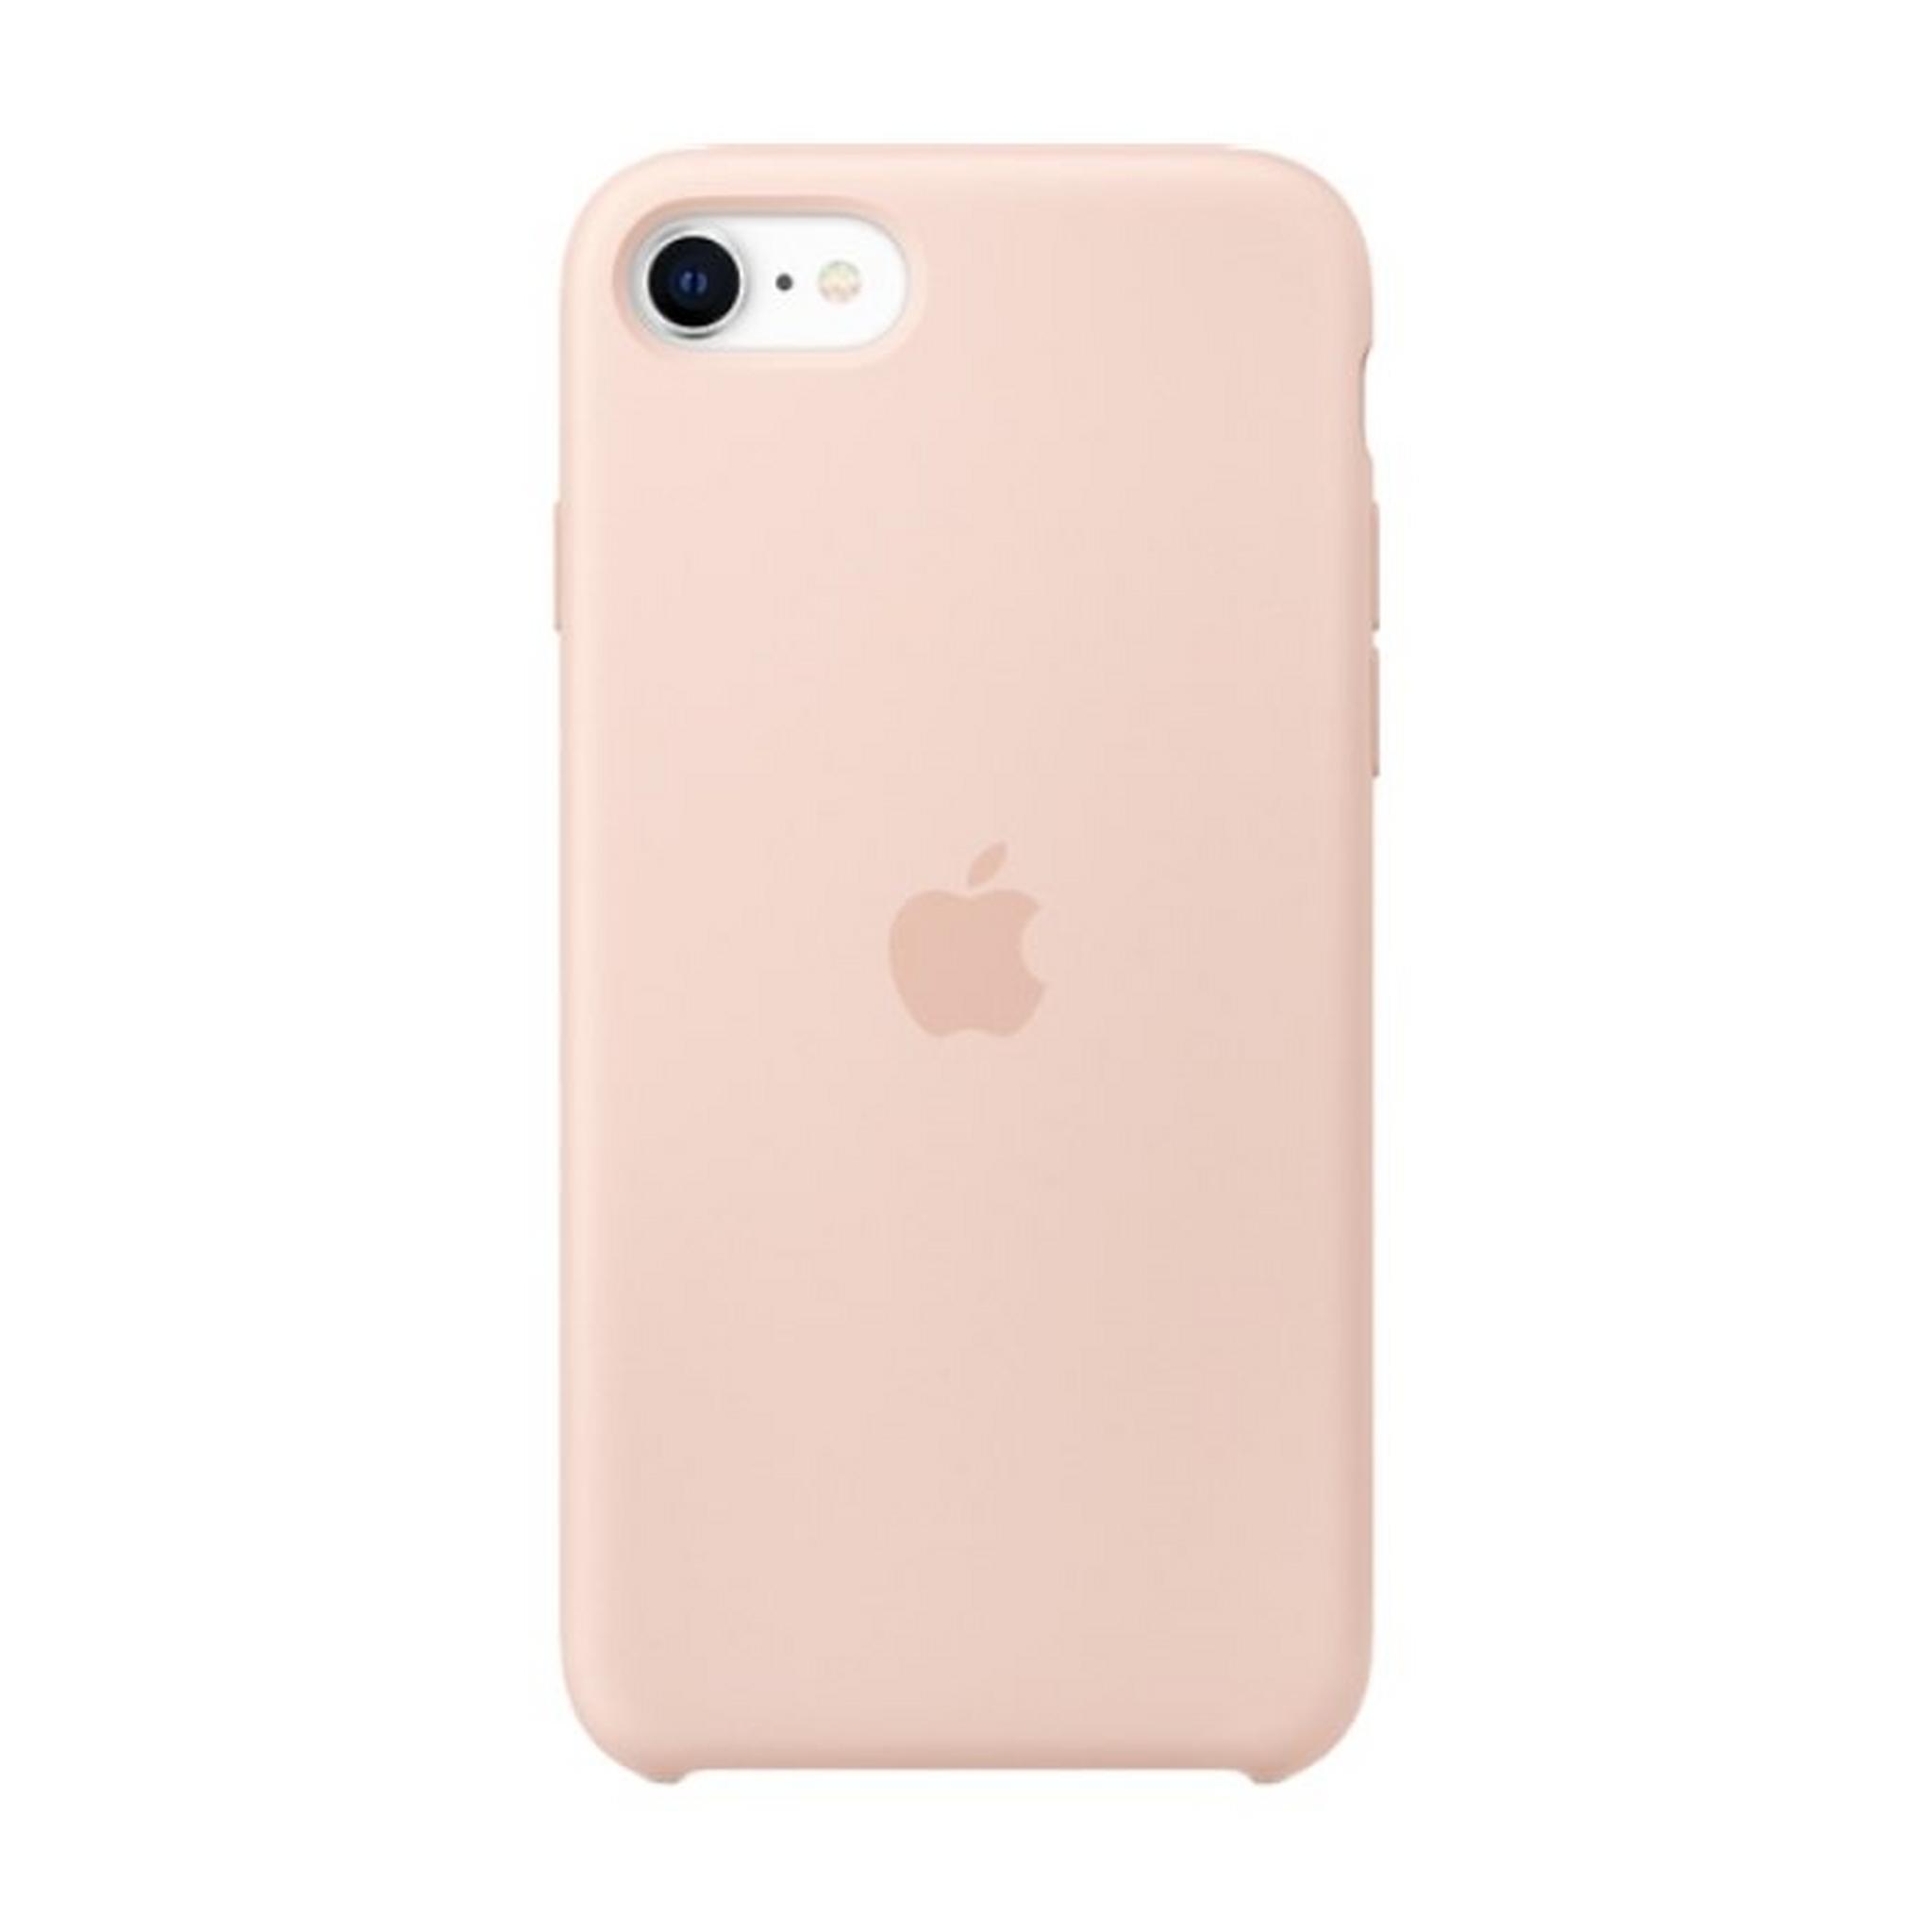 Apple iPhone SE Silicone Case - Pink